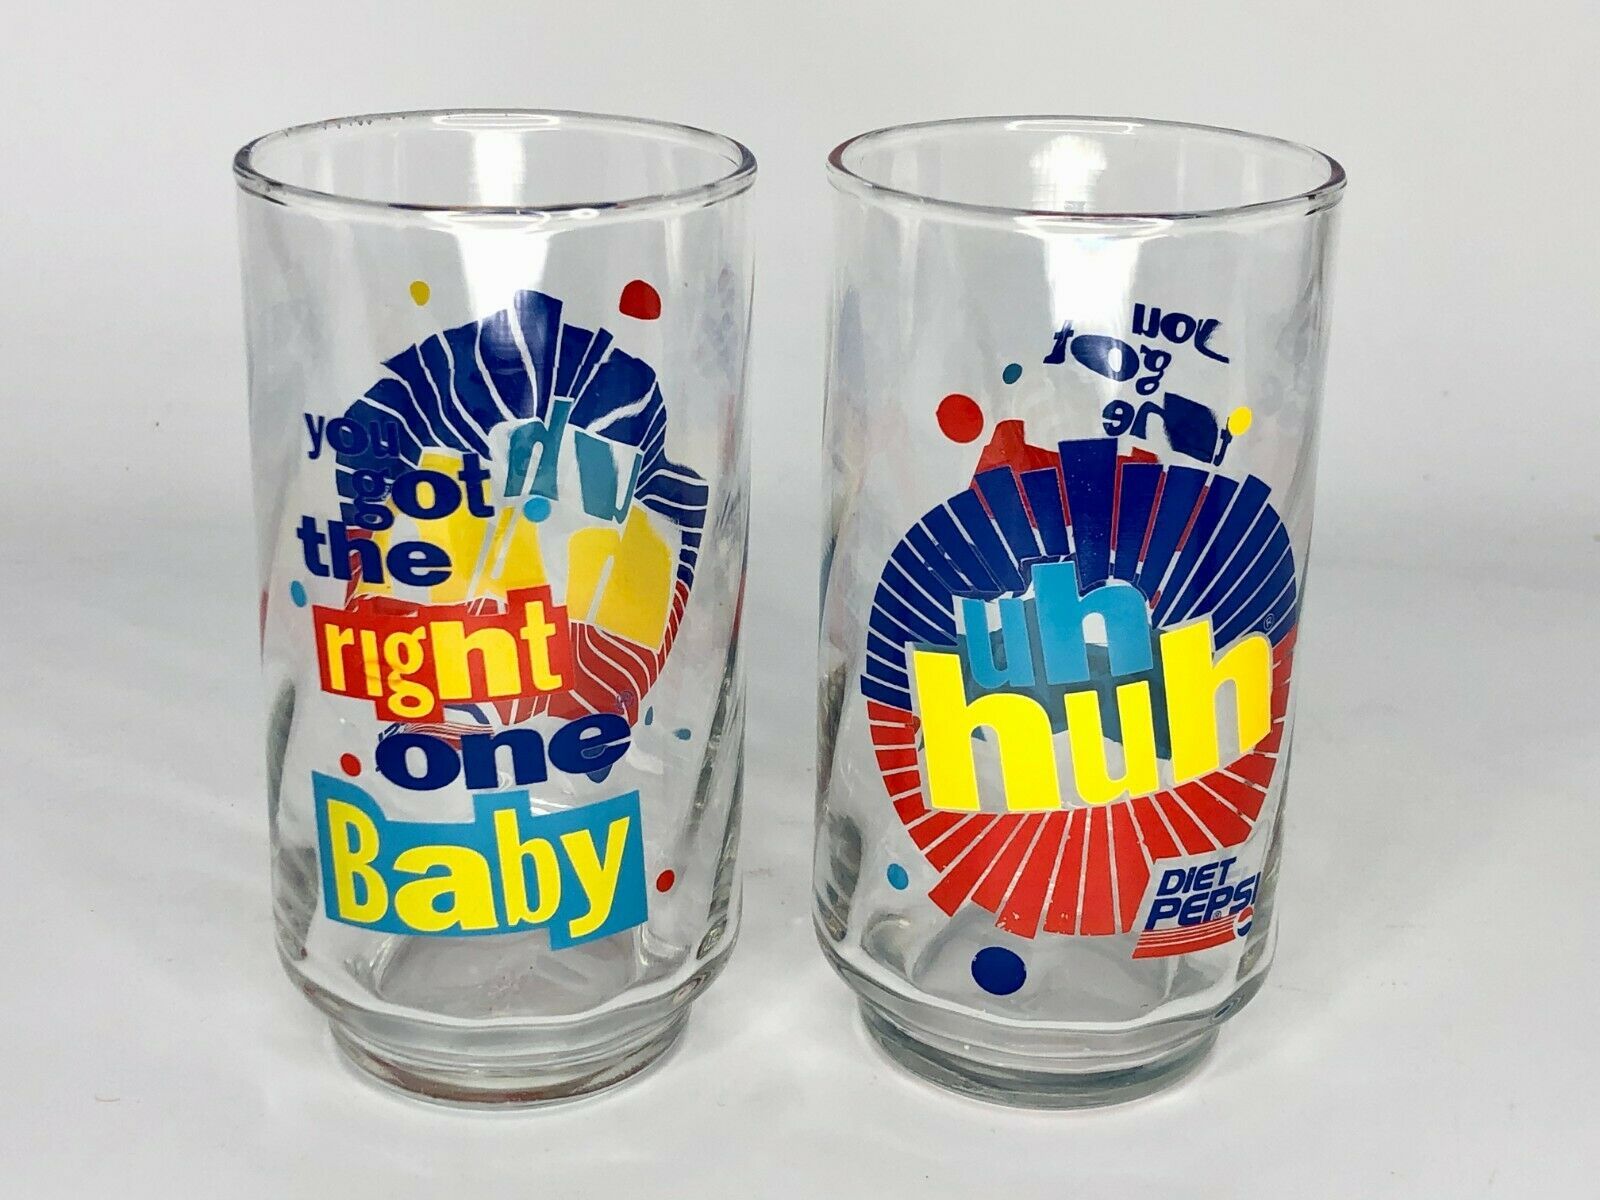 Diet Pepsi You Got the Right One Baby Uh Huh by Libbey Glass Collection.